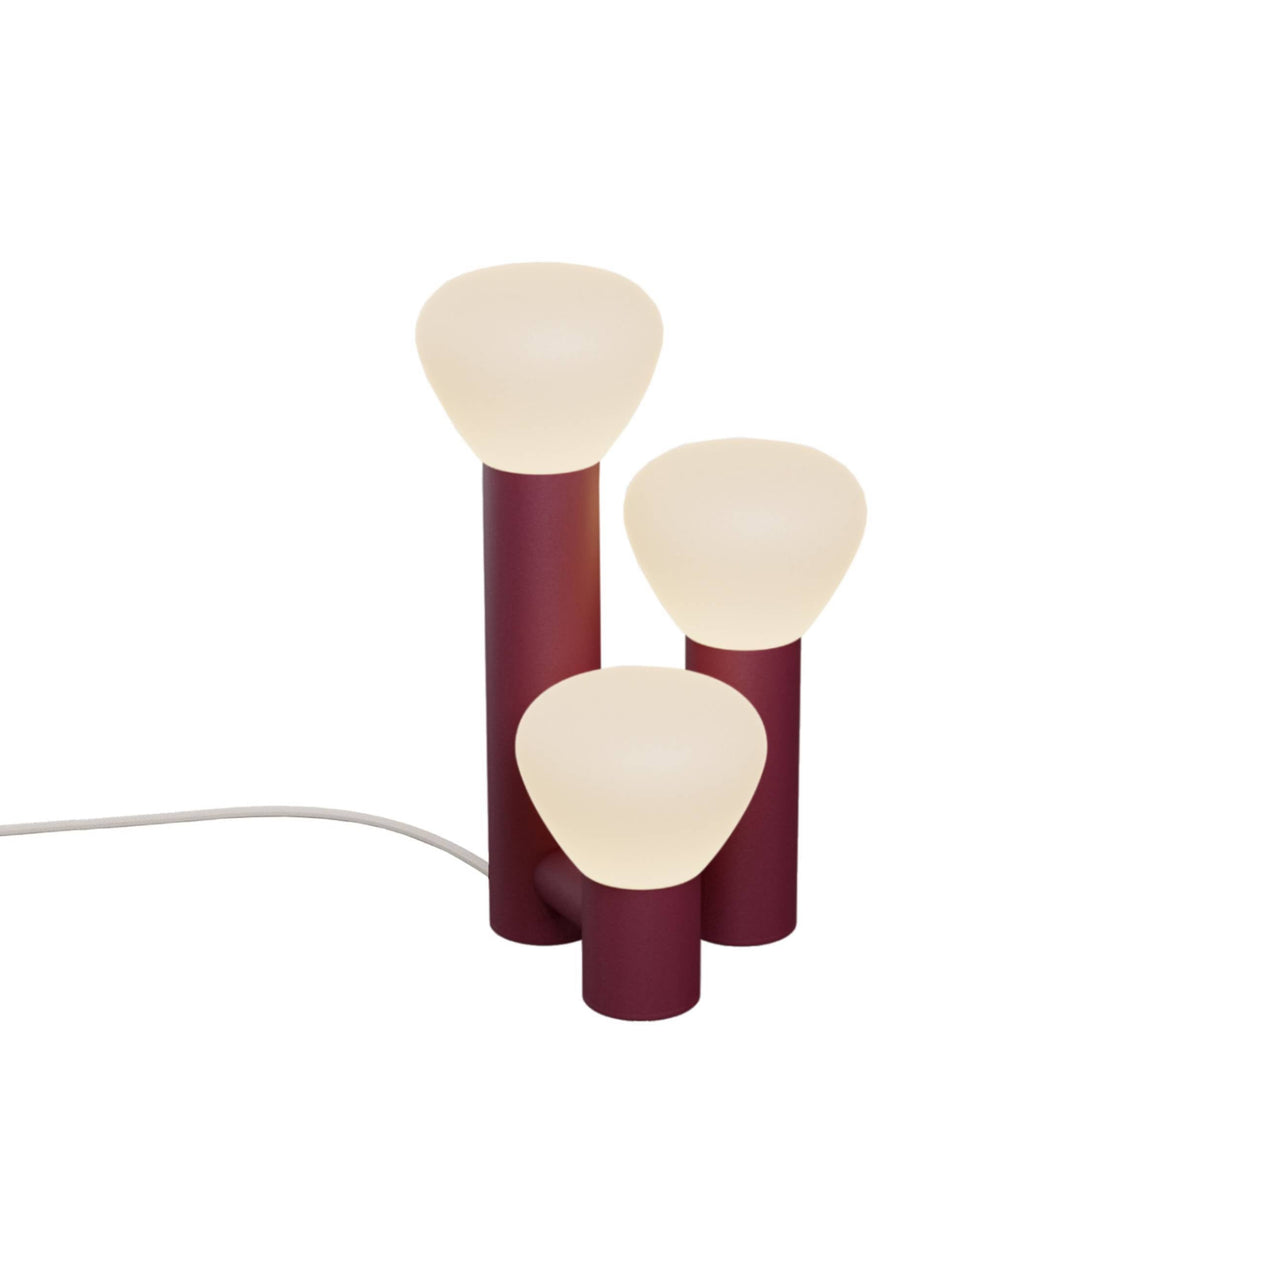 Parc 06 Table Lamp: Footswitch +  Burgundy + Beige